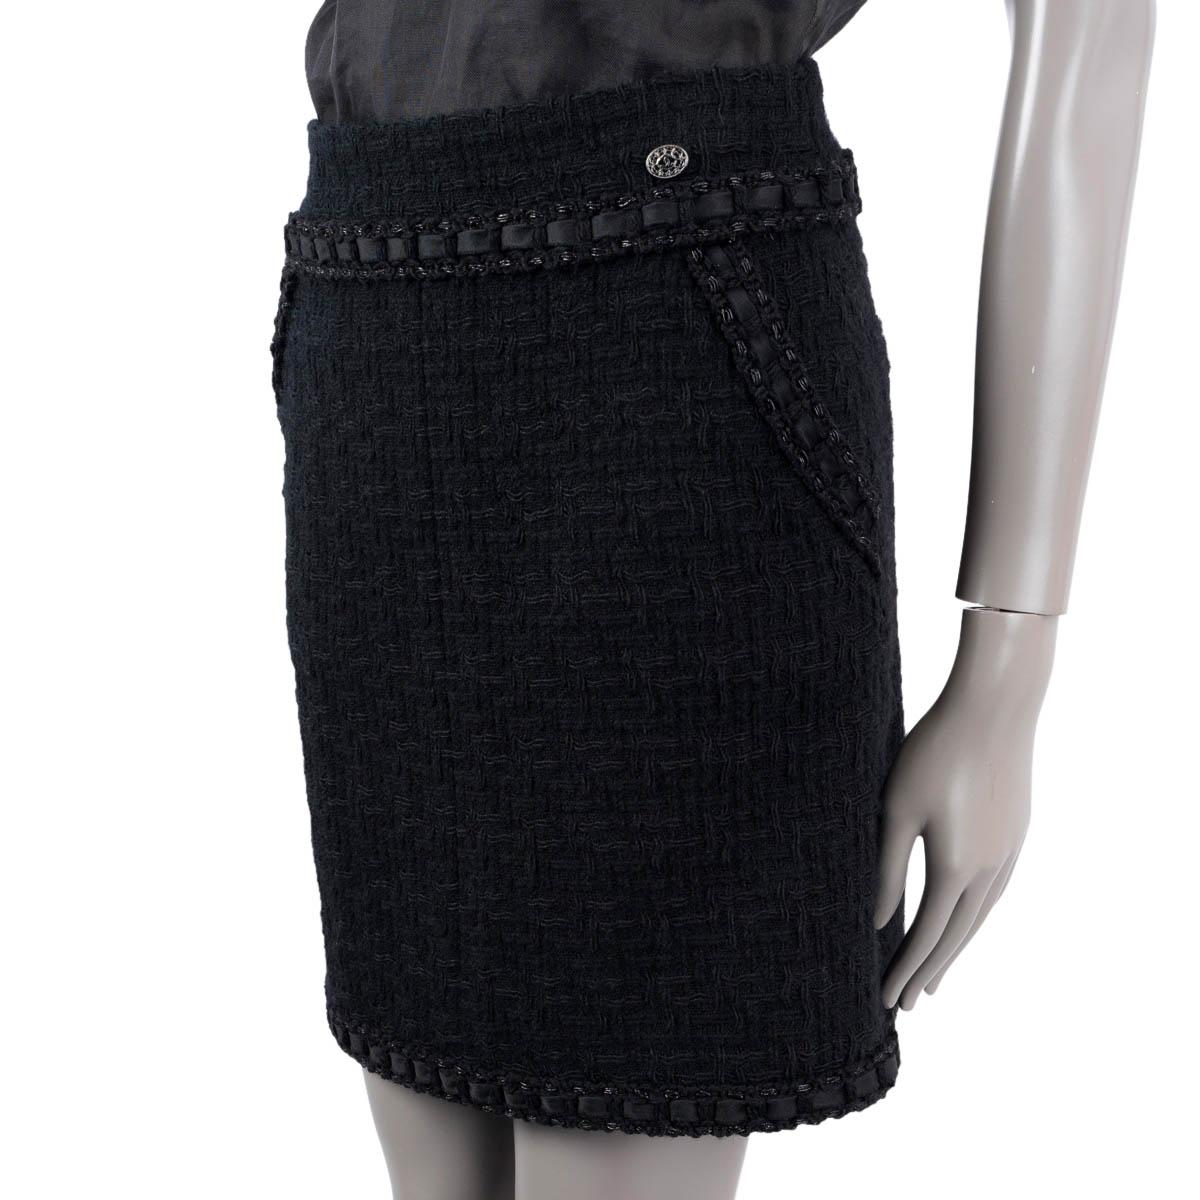 100% authentic Chanel tweed mini skirt in black wool (100%). Features a satin ribbon trim and two slant pockets on the front. Opens with a concealed zipper and a hook in the back. Lined in silk (100%). Has been worn and is in excellent condition.